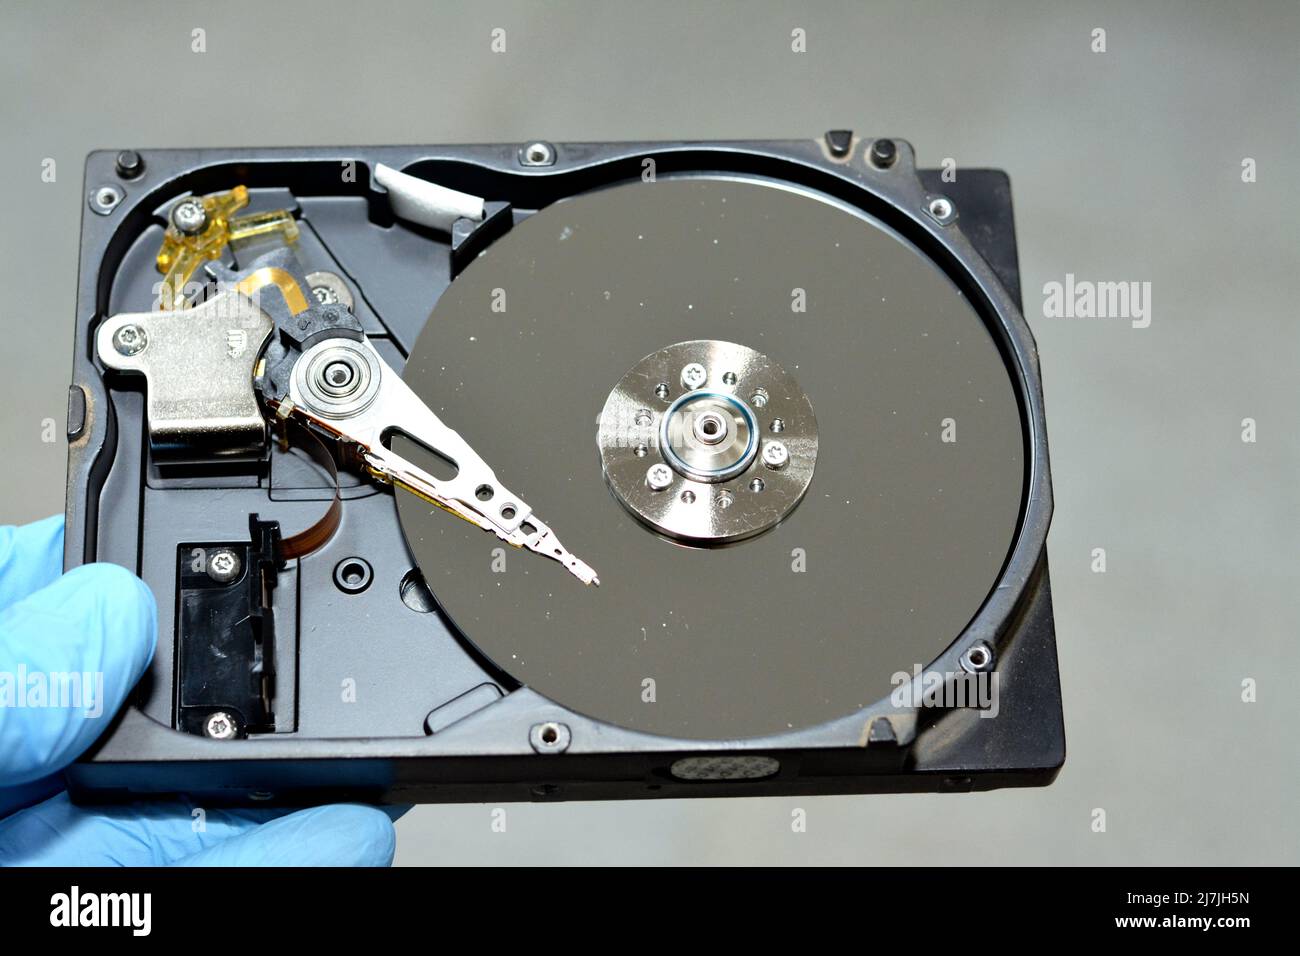 Disassembled computer hard disk drive storage memory with platters, spindle, actuator and read, write head, repair broken computer, data, hardware, an Stock Photo